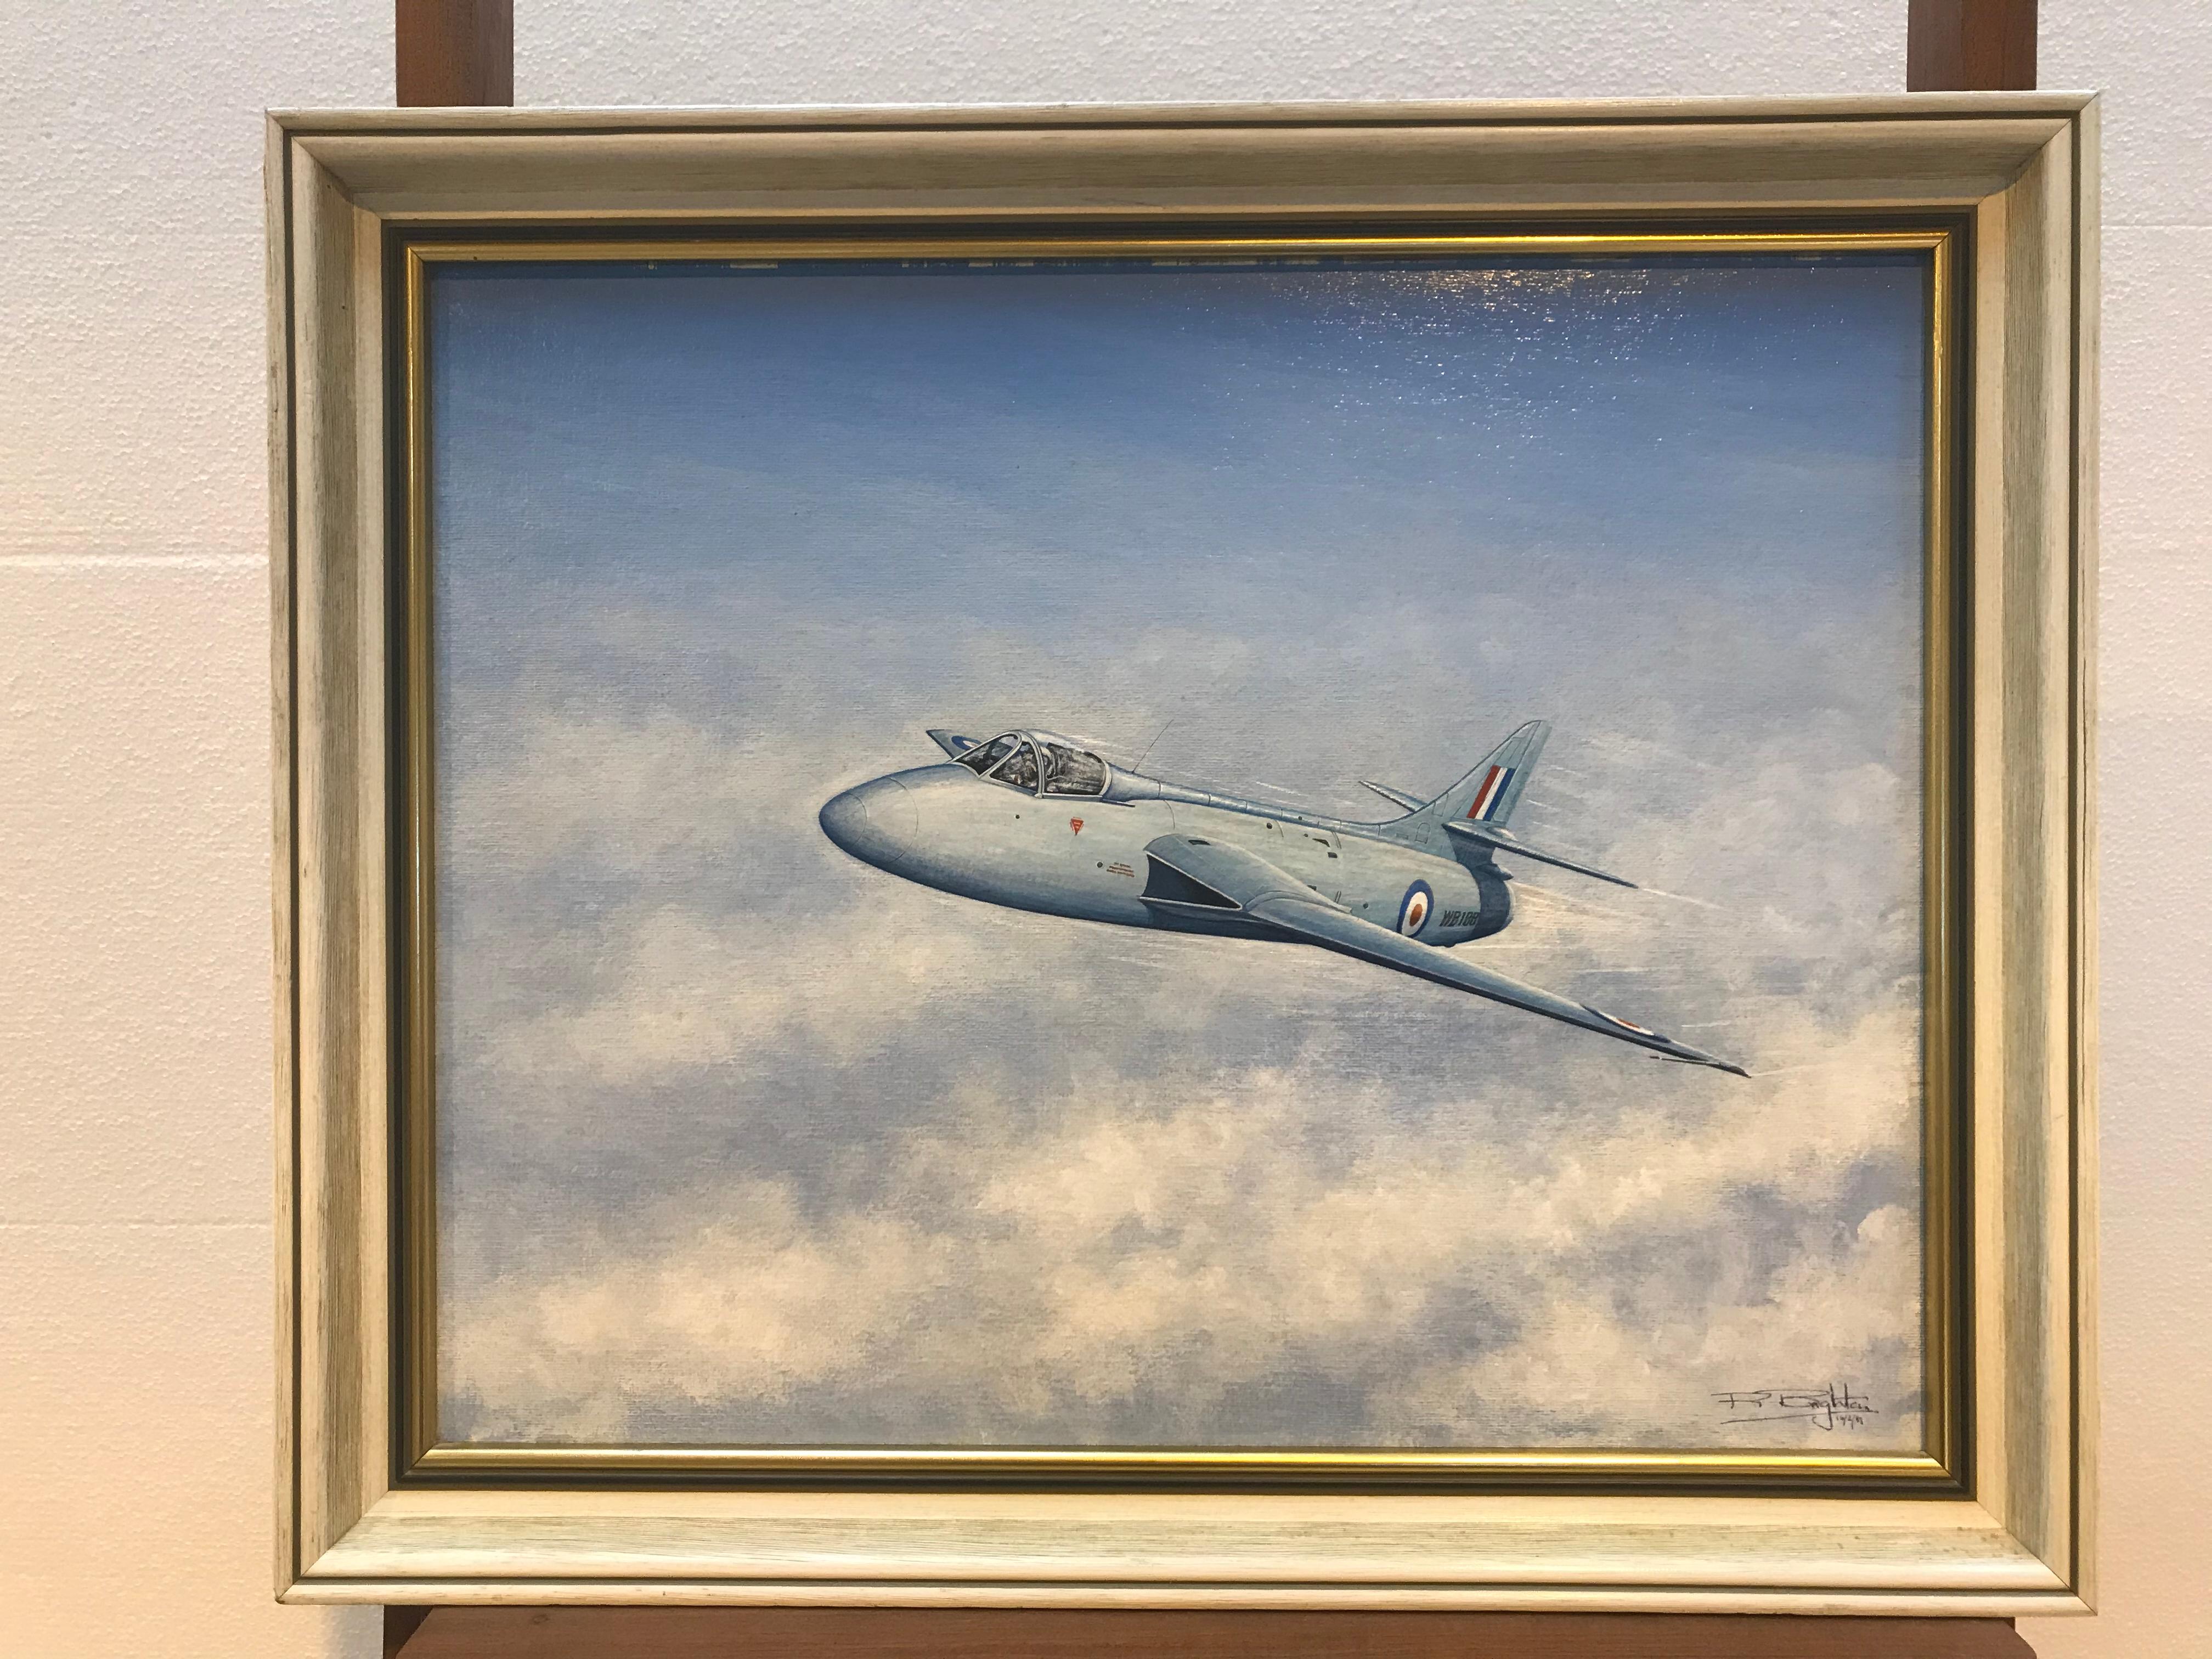 Painted by R Brighton. Original oil painting on board showing RAF Hawker Hunter in flight, signed and dated 16.02.81
WB188 in 1952 was the holder of the world air speed record for jet powered aircraft at 727.63 mph.
Framed, overall very good